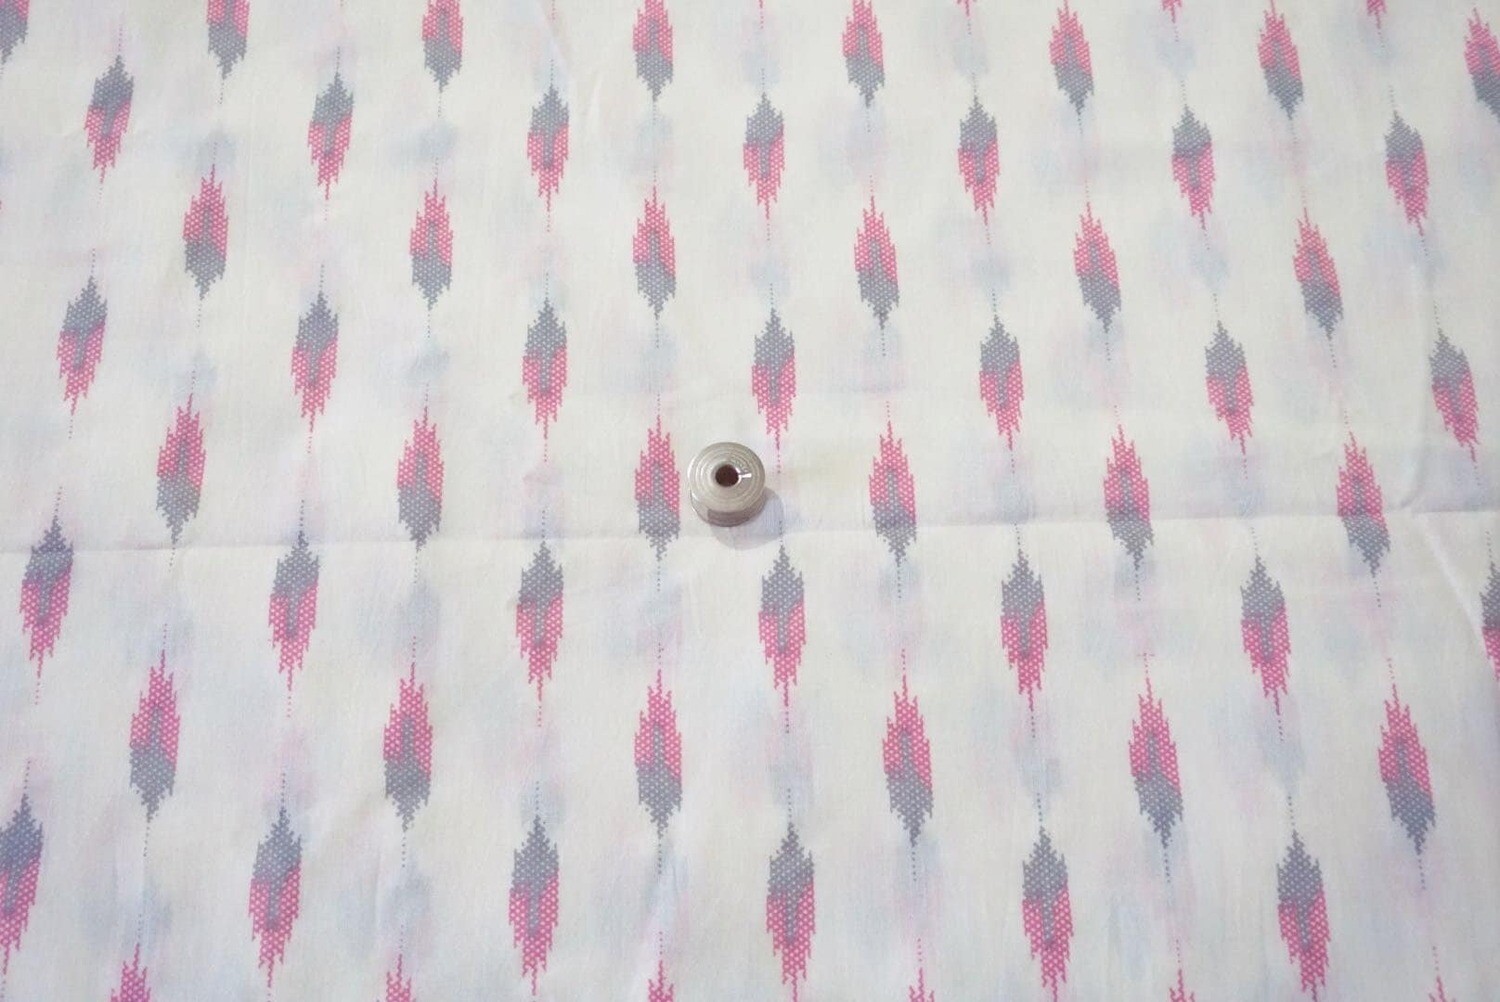 Ivory White Indian Cotton Fabric, Off White Cotton, Ikat Print, Pink Grey Cotton Fabrics, 44 in wide